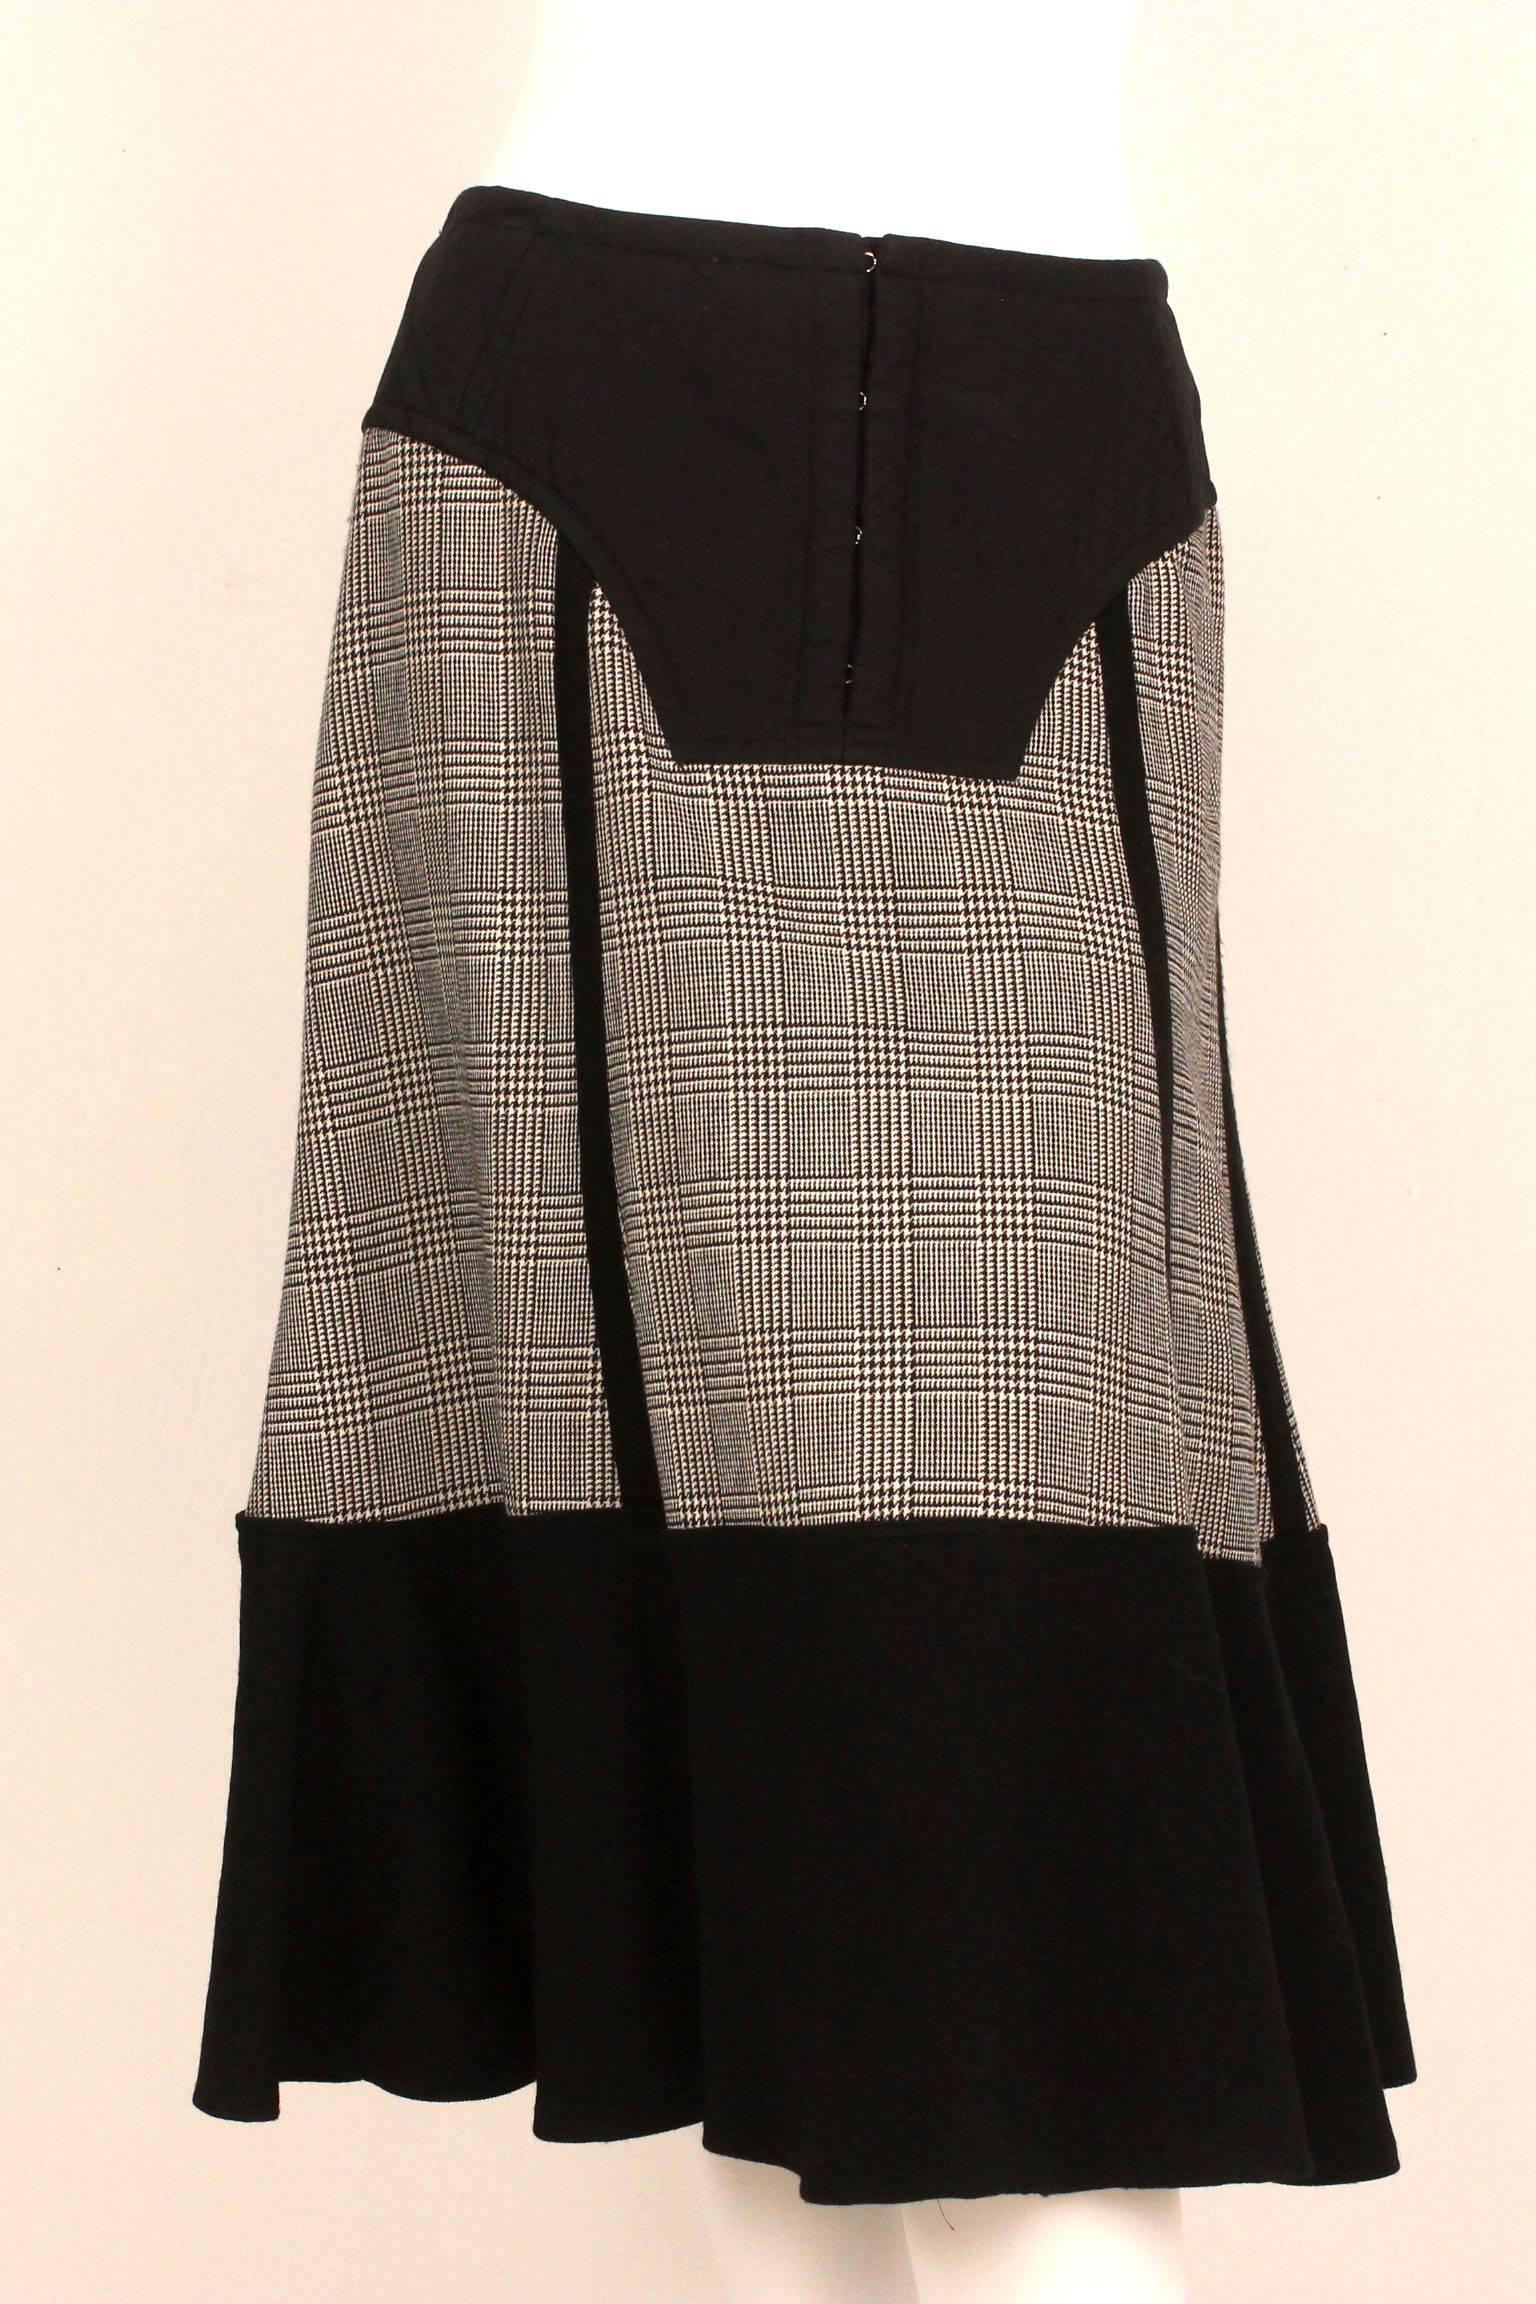 Comme des Garcons Wool Herringbone Skirt with Quilted Waist In Excellent Condition For Sale In New York, NY